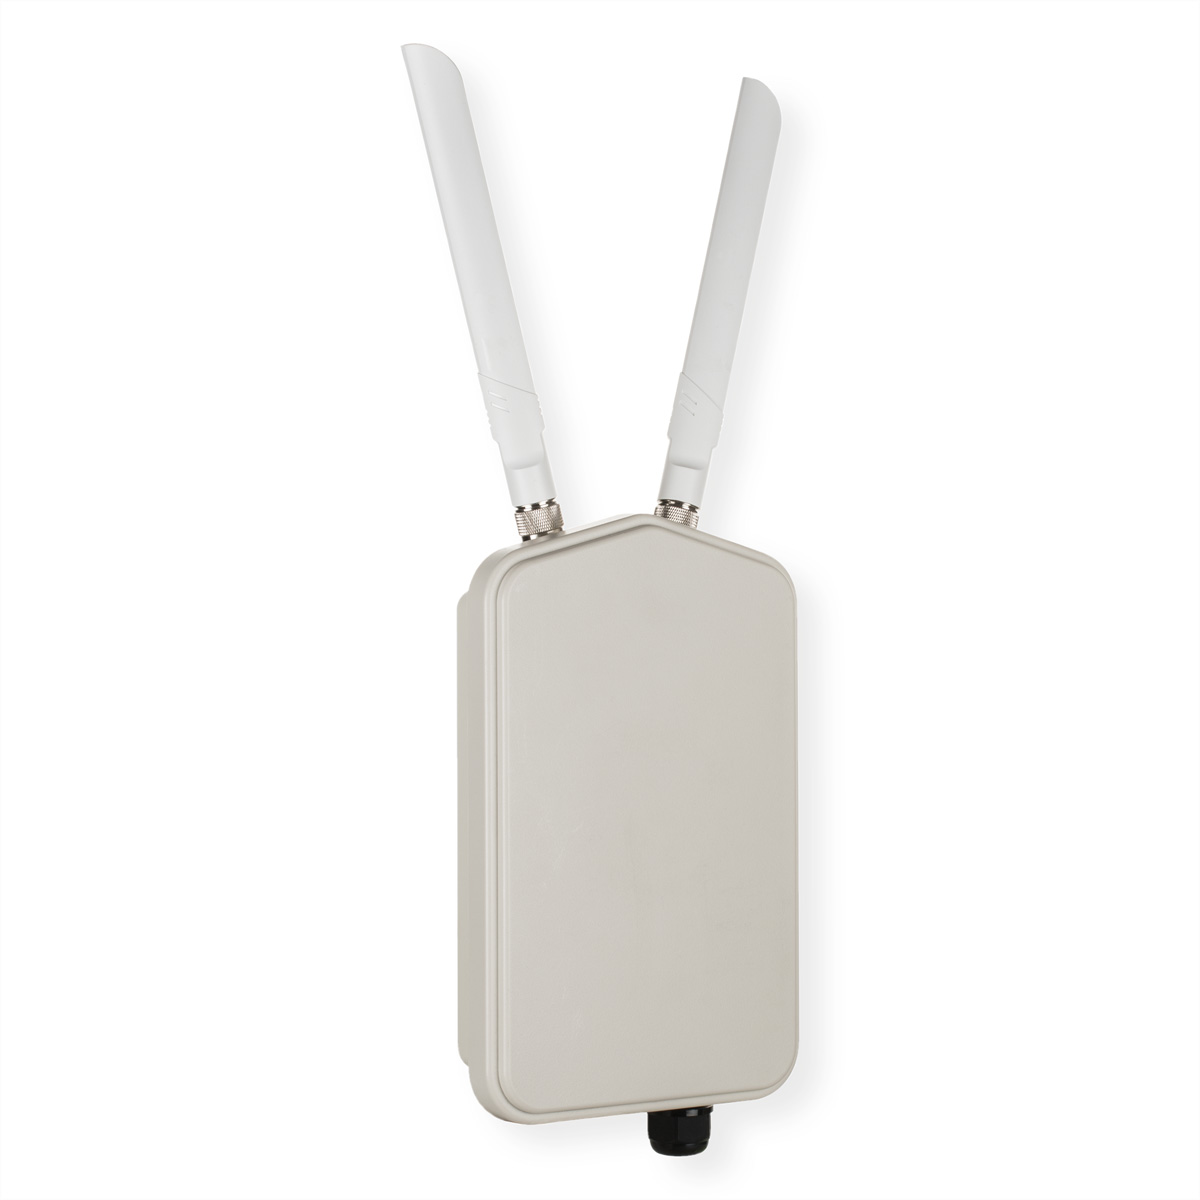 AC1300 DWL-8720AP Dual Band Wave Unified Gbit/s 1,3 Access Access Outdoor Point D-LINK Point 2